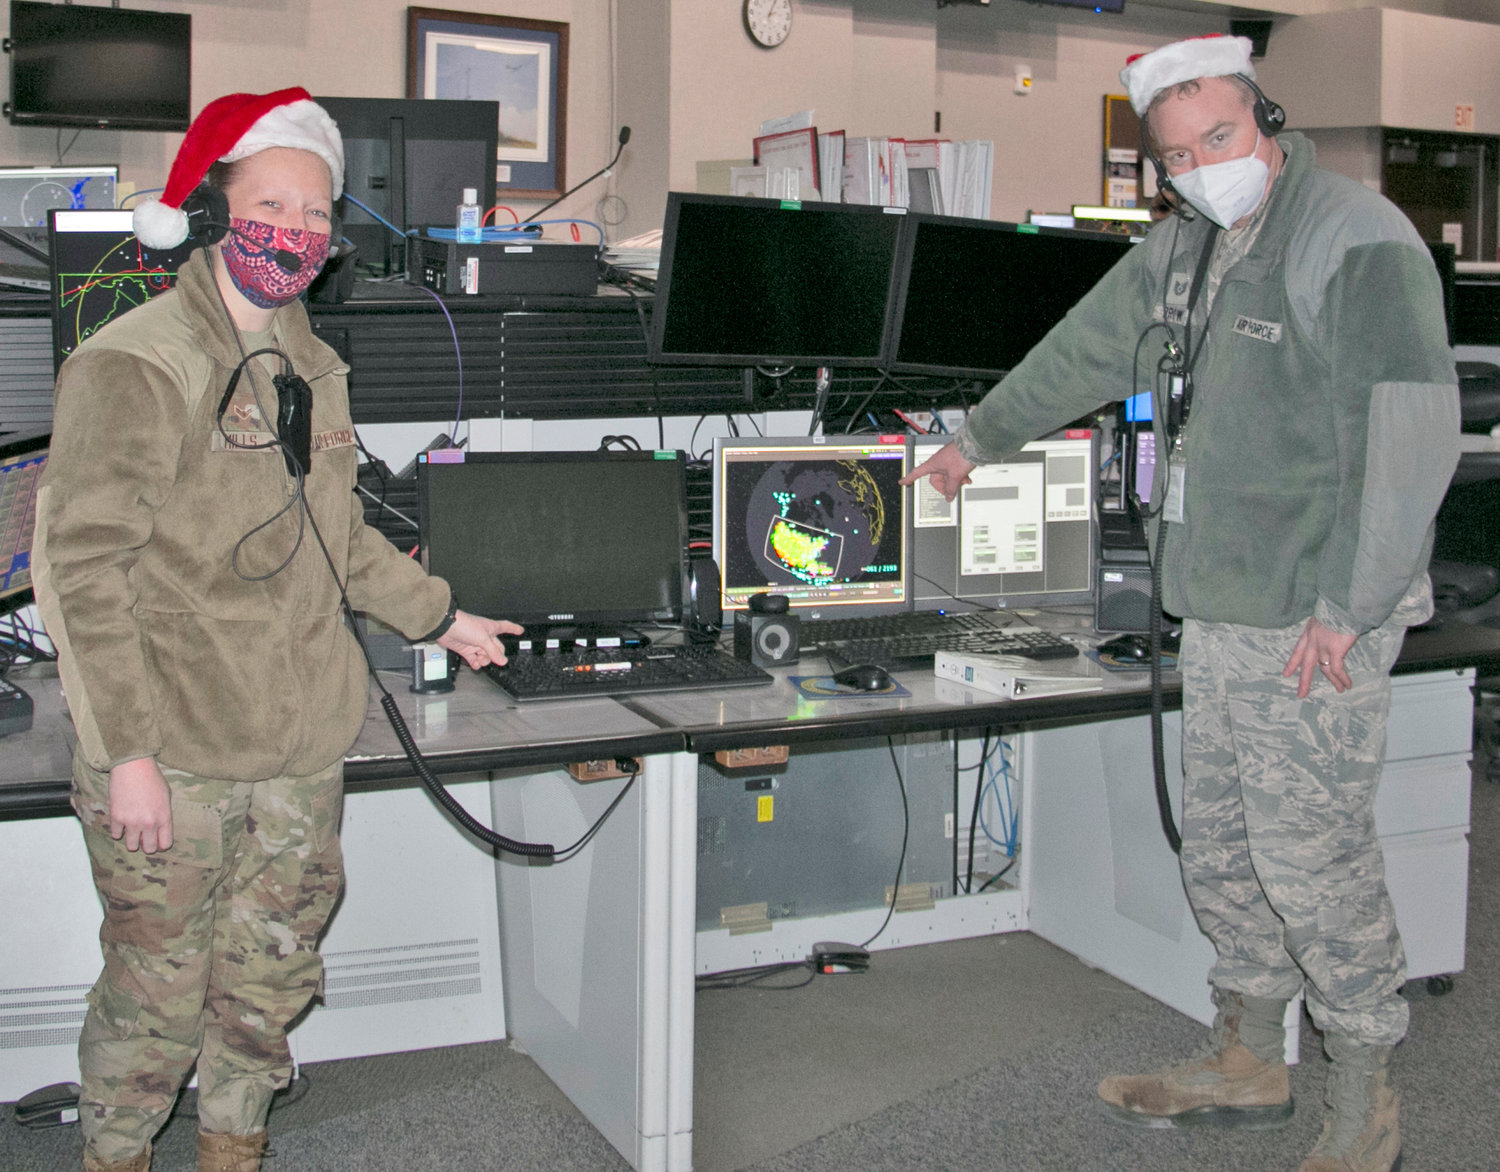 PREPARING TO MONITOR SANTA — Airman 1st Class Megan Mills, left, and Tech. Sgt. Kriston Brown participate in a recent Santa Claus tracking exercise at the Eastern Air Defense Sector. They were prepping for today, Christmas Eve, when EADS will support the North American Aerospace Defense Command’s (NORAD) annual Santa tracking efforts.